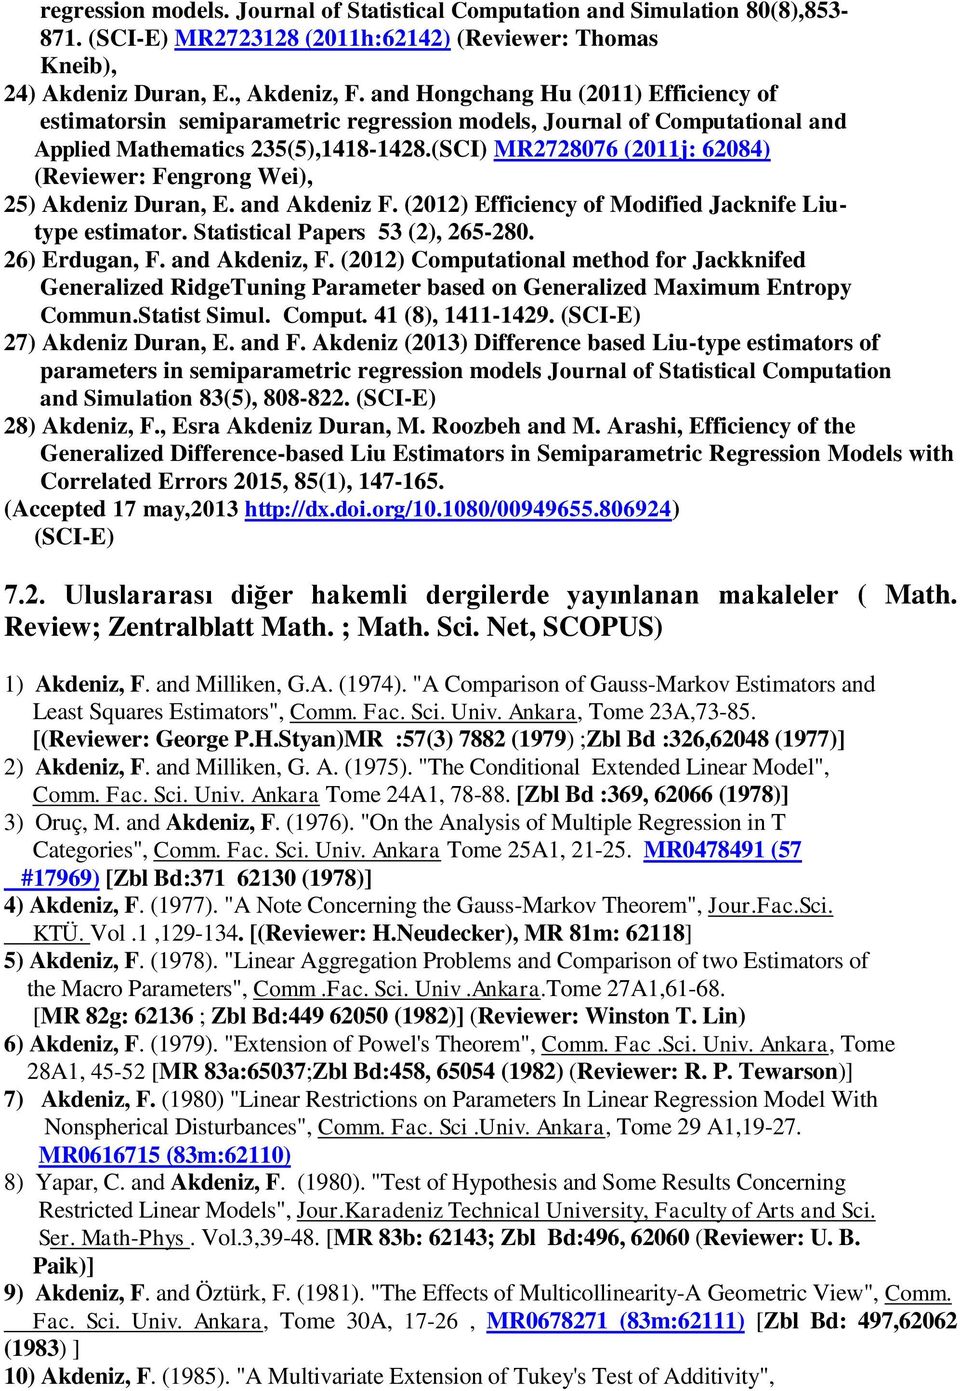 (SCI) MR2728076 (2011j: 62084) (Reviewer: Fengrong Wei), 25) Akdeniz Duran, E. and Akdeniz F. (2012) Efficiency of Modified Jacknife Liutype estimator. Statistical Papers 53 (2), 265-280.